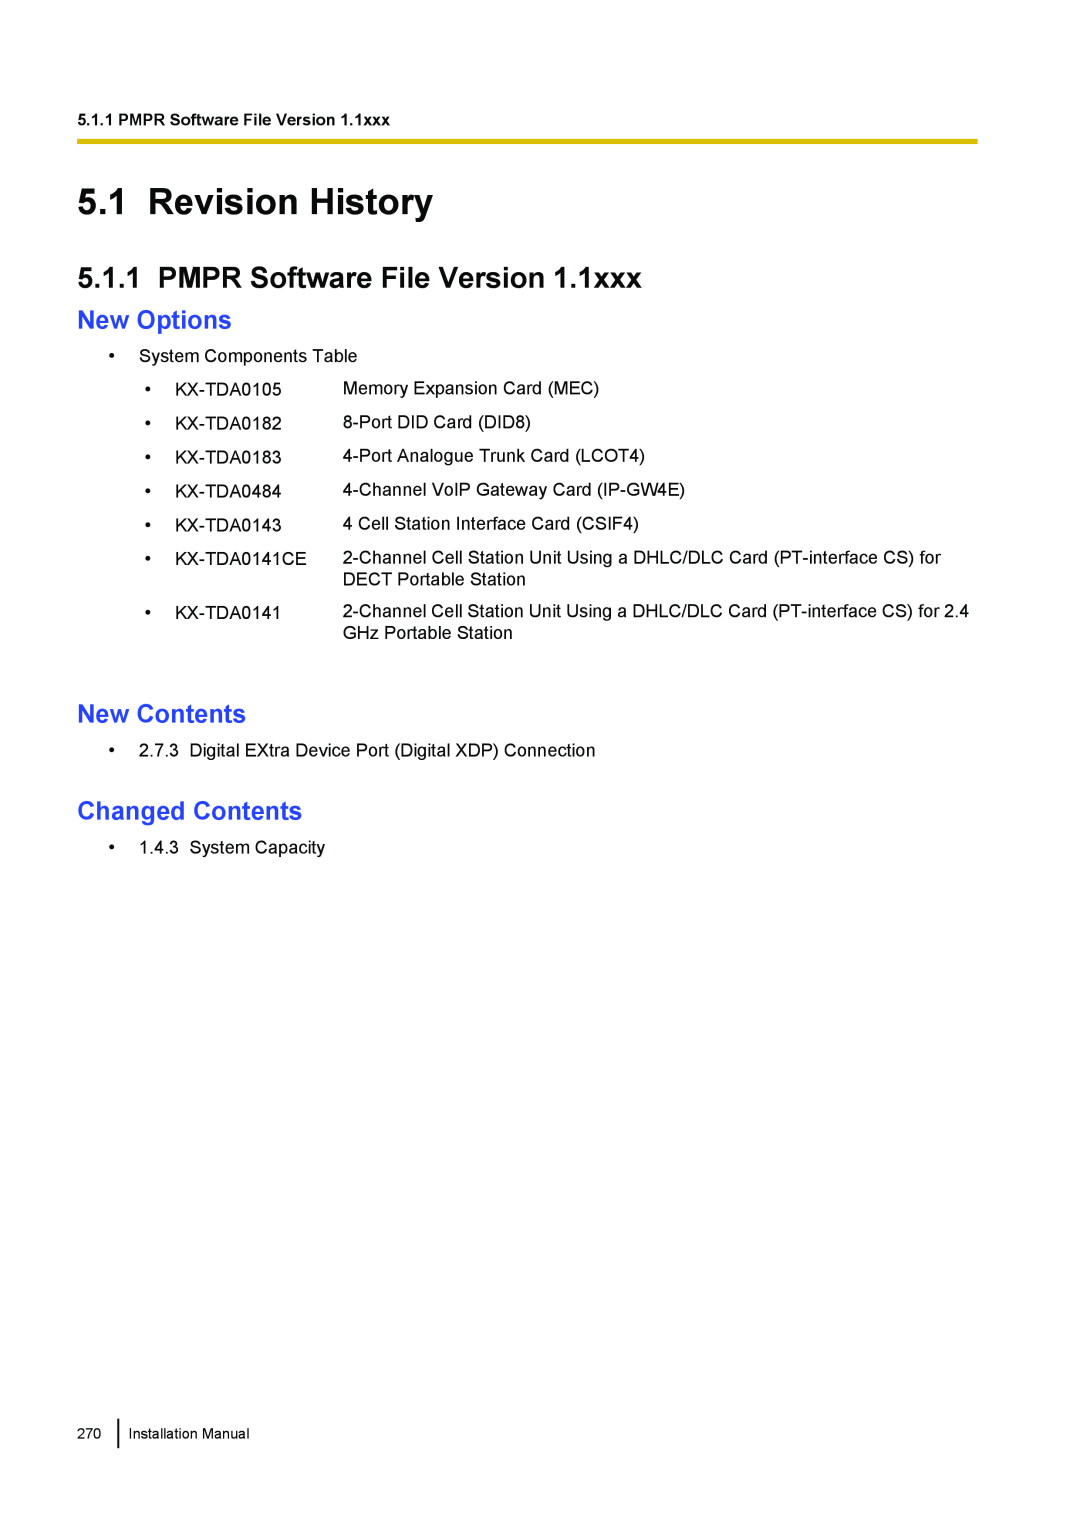 Panasonic KX-TDA100 installation manual Revision History, PMPR Software File Version, New Options, Changed Contents 